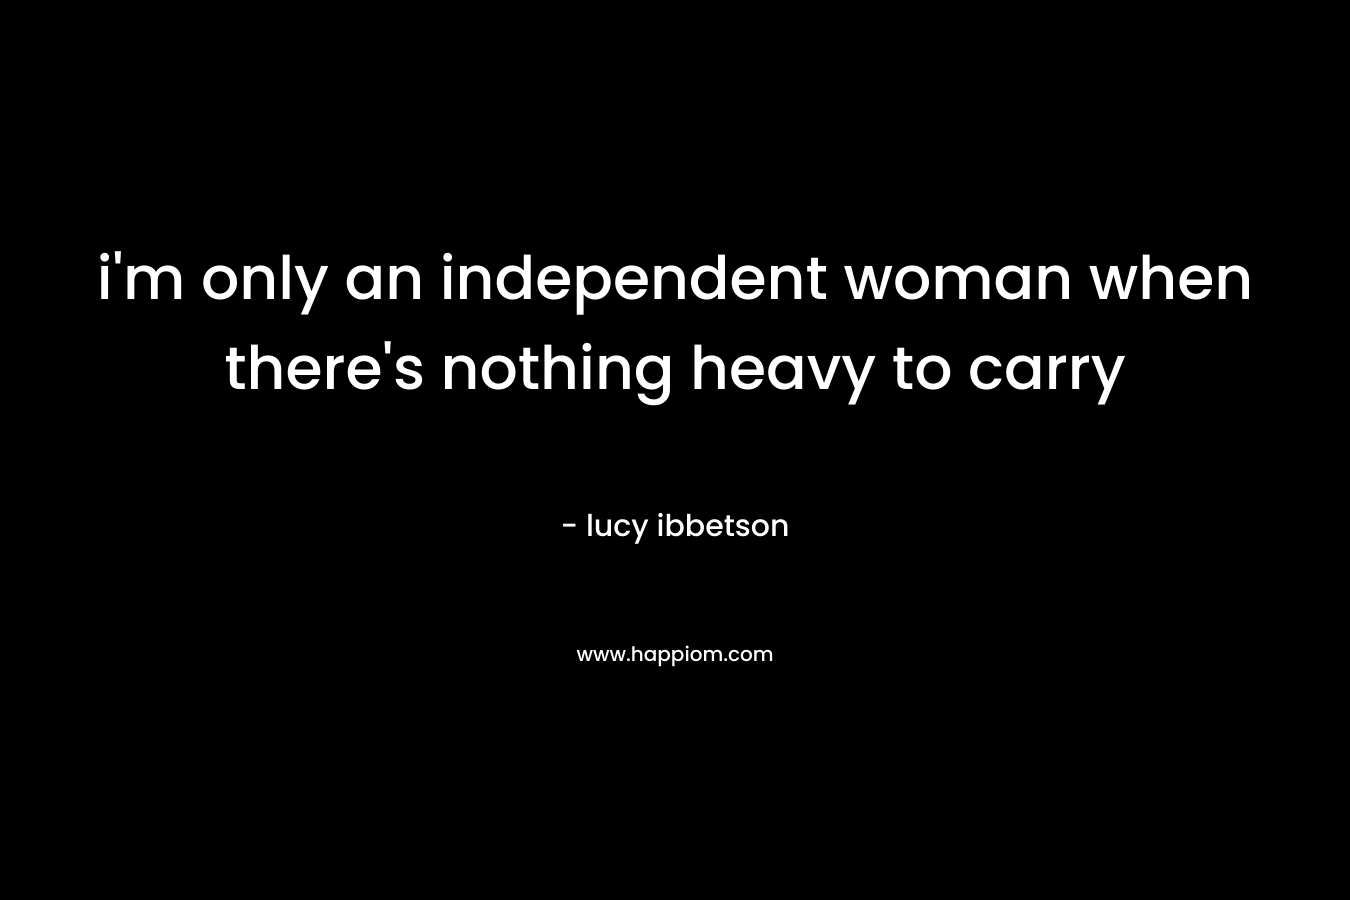 i'm only an independent woman when there's nothing heavy to carry